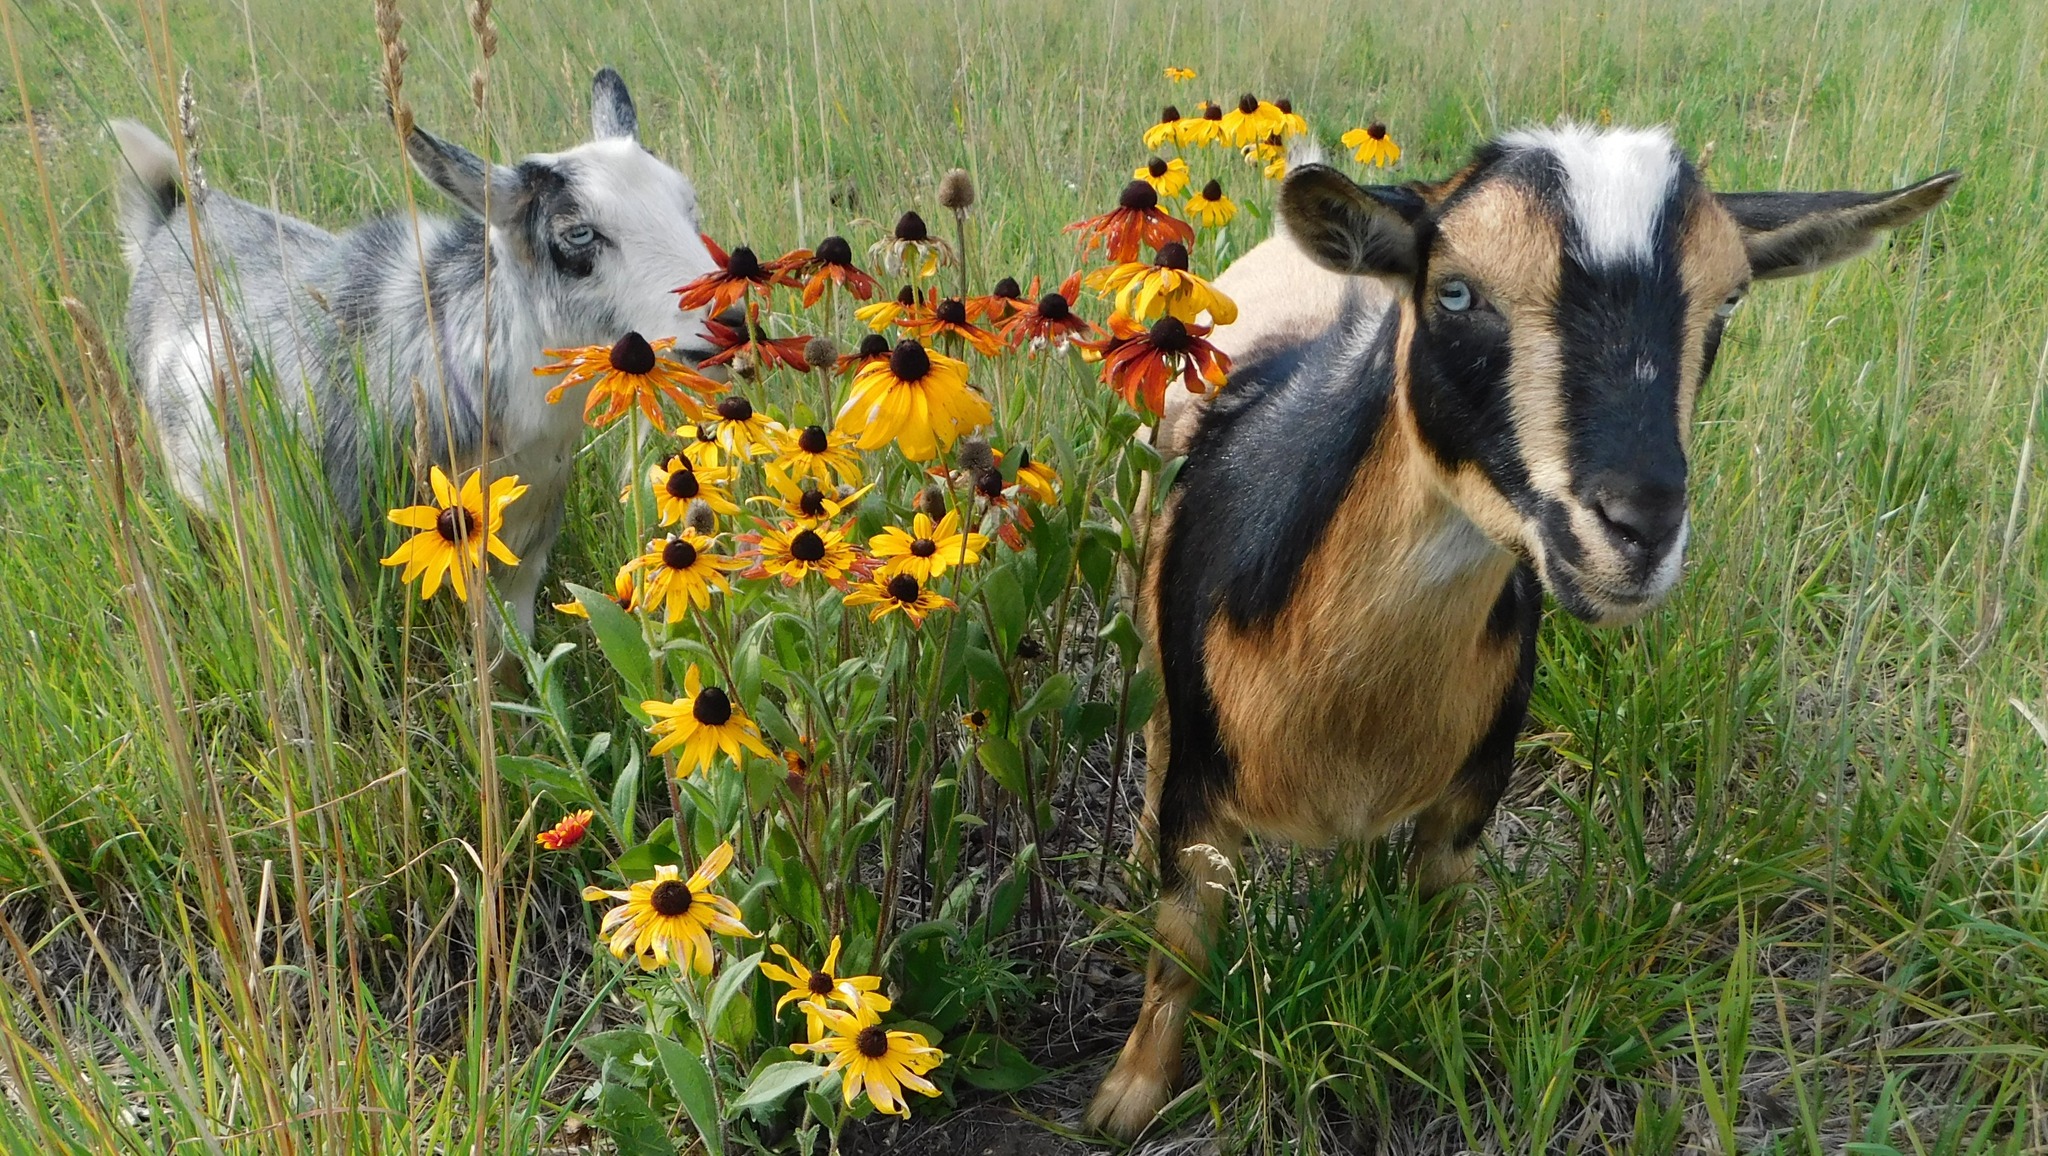 Goats and Flowers